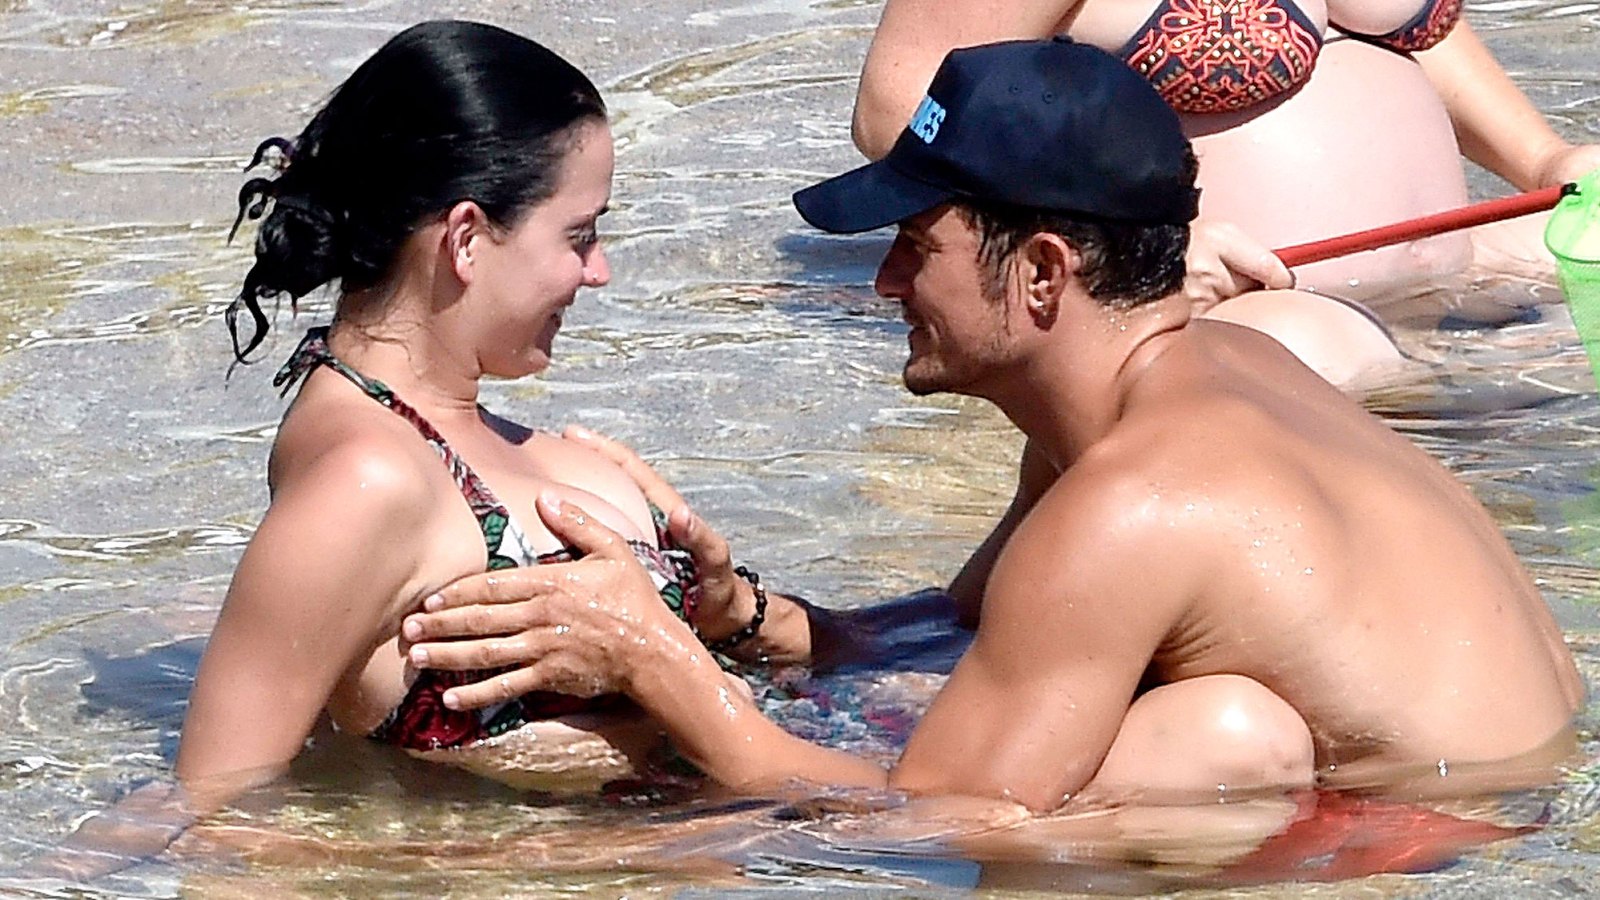 Orlando Bloom Grabs Katy Perry's Boobs During Beach Vacation